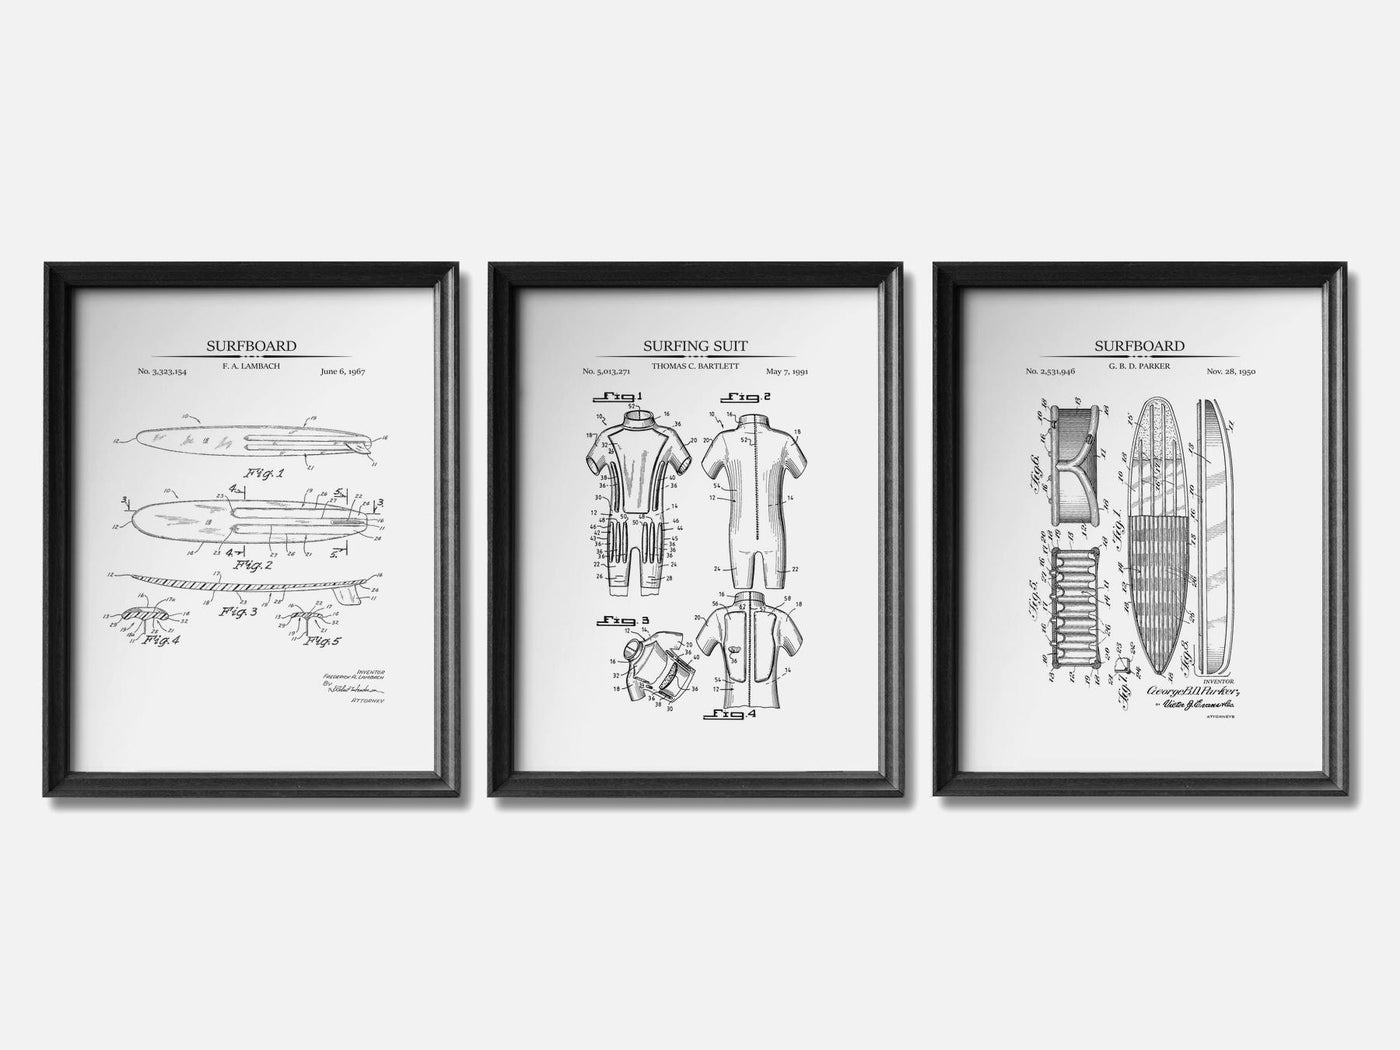 Surfing Patent Print Set of 3 mockup - A_t10068-V1-PC_F+B-SS_3-PS_11x14-C_whi variant